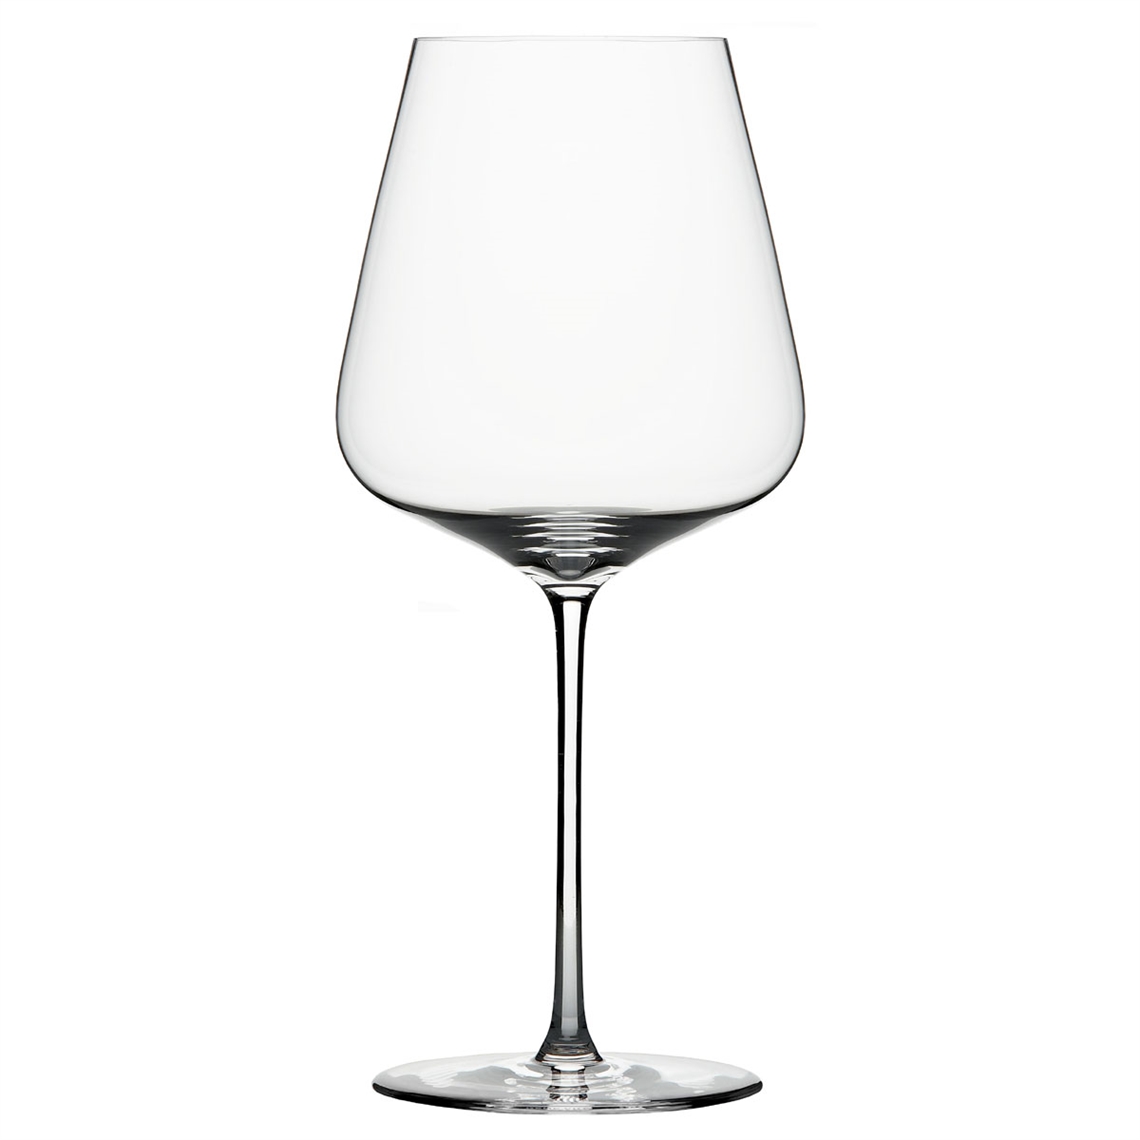 View more crystal wine glasses from our Premium Mouth Blown Glassware range